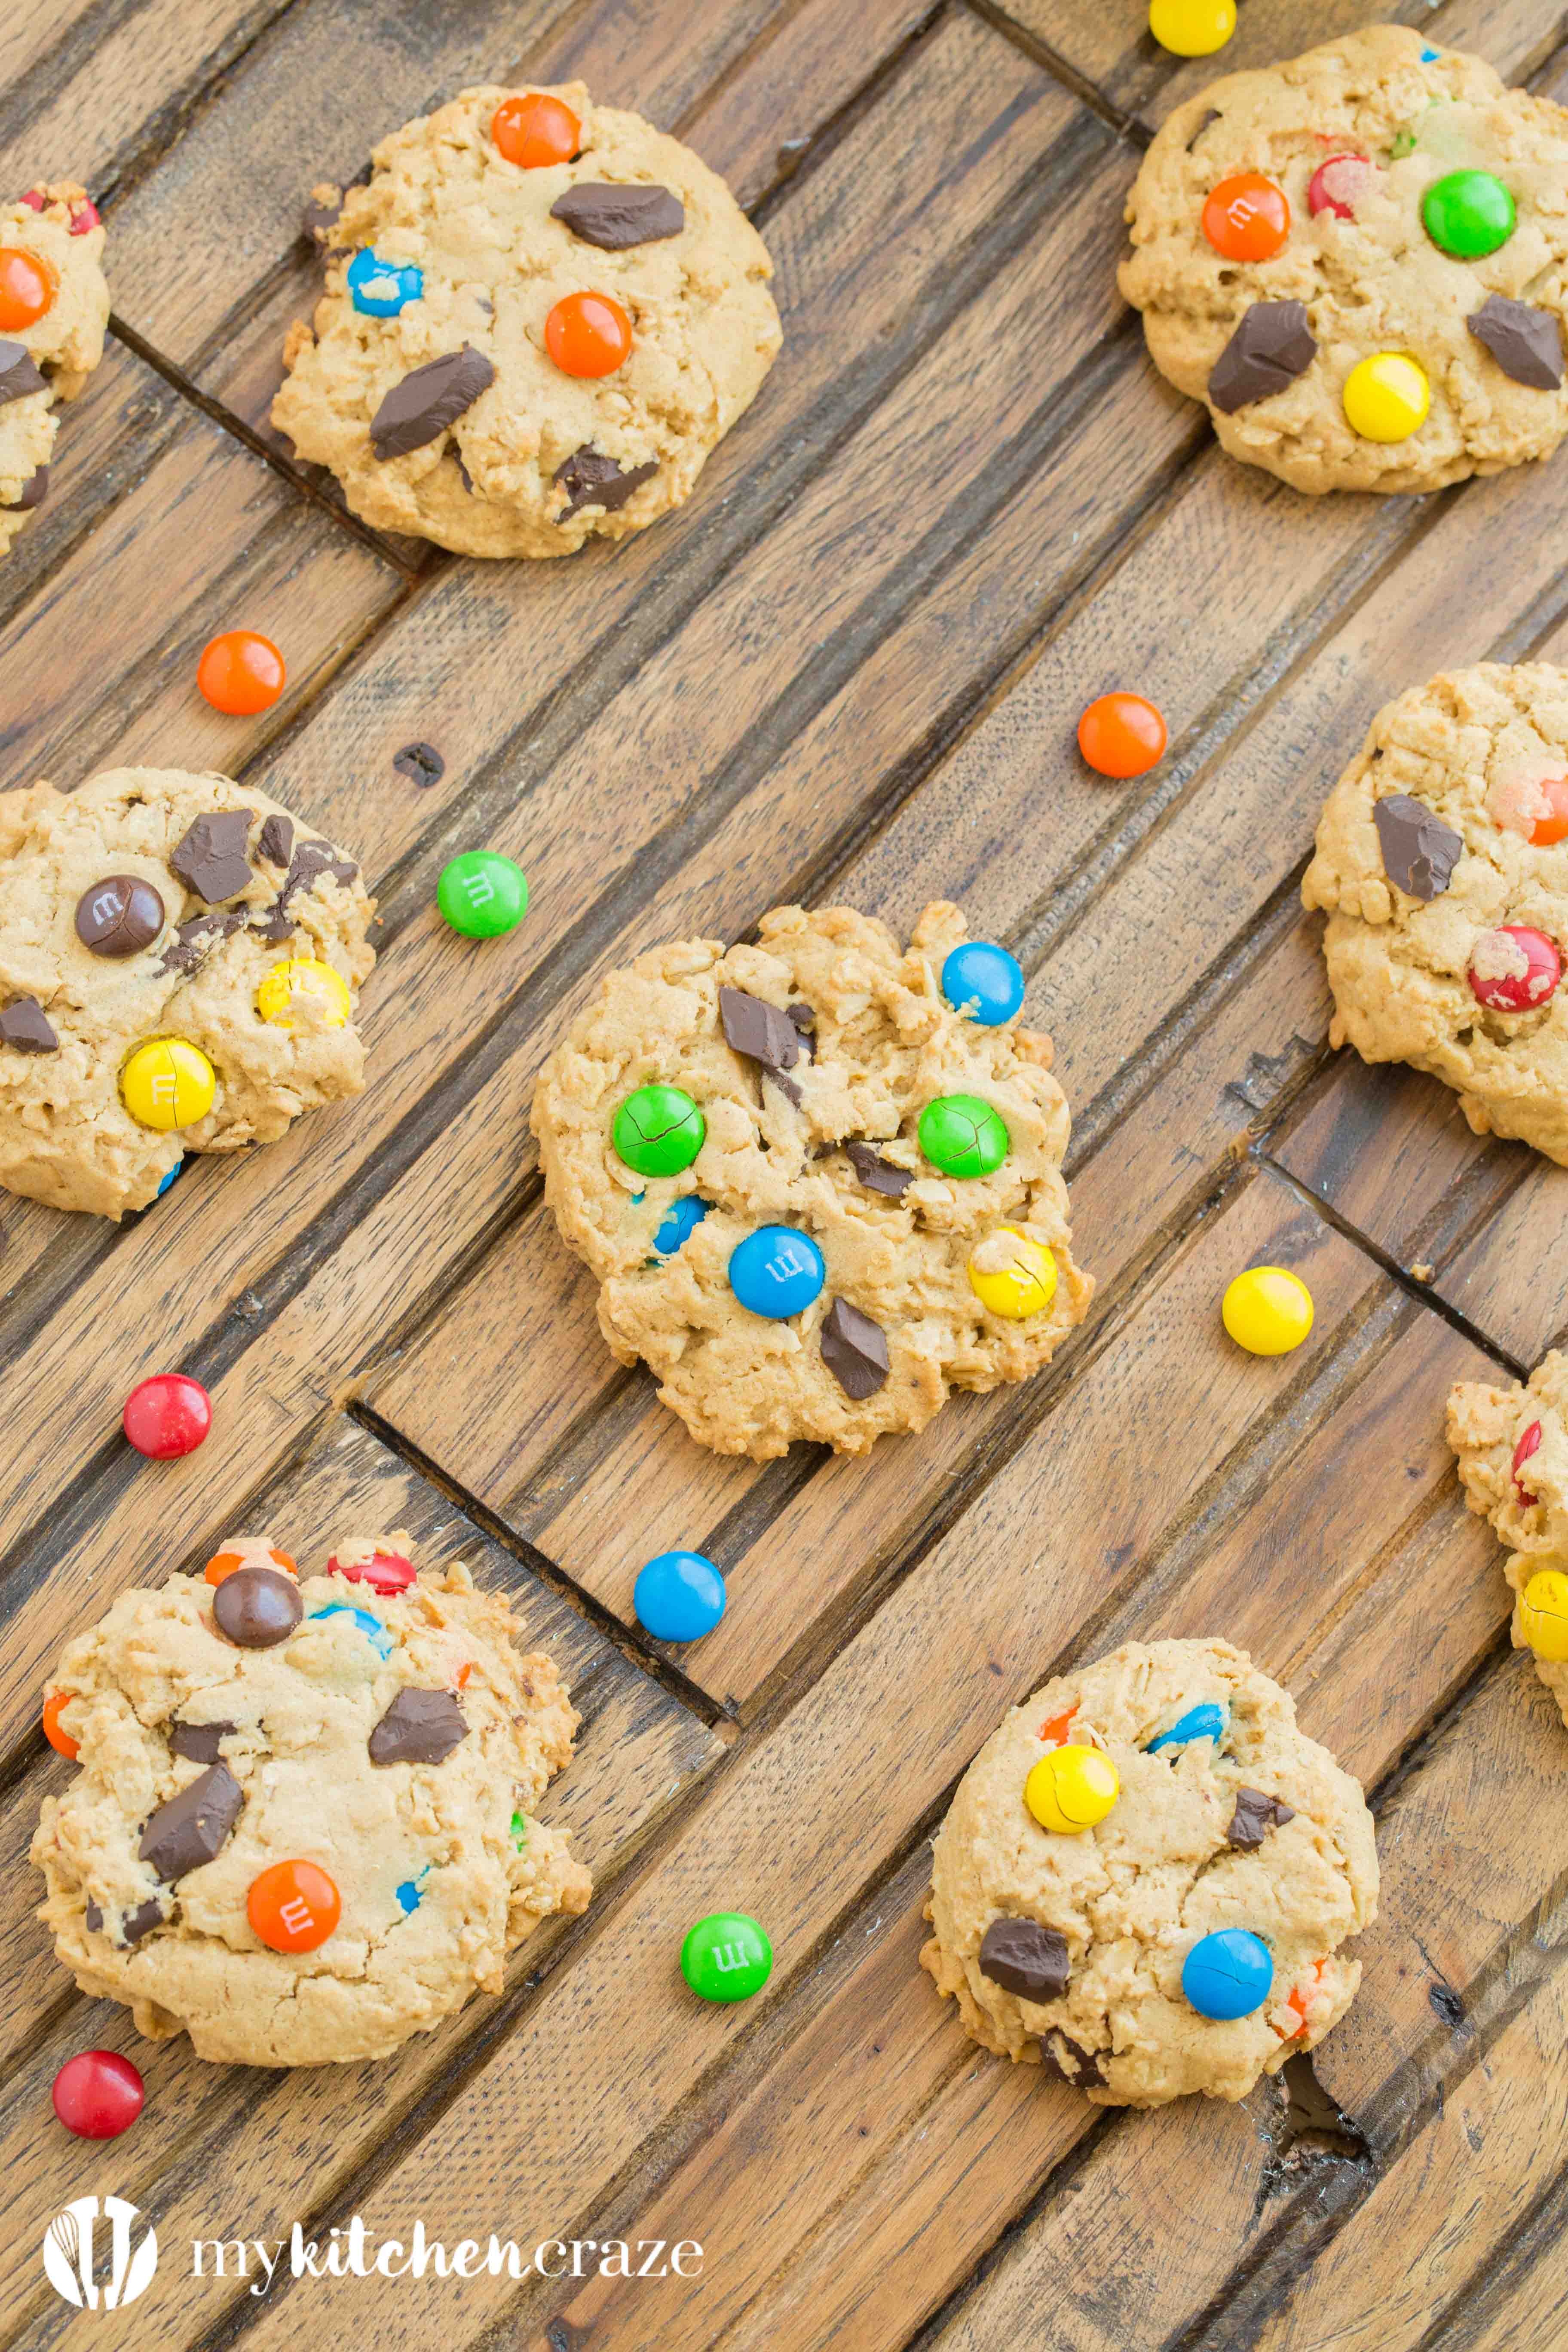 Monster Cookies are everything you want in a cookie and more. These cookies are loaded with bright colorful chocolate candies, chocolate chips, peanut butter and oats. Delicious!